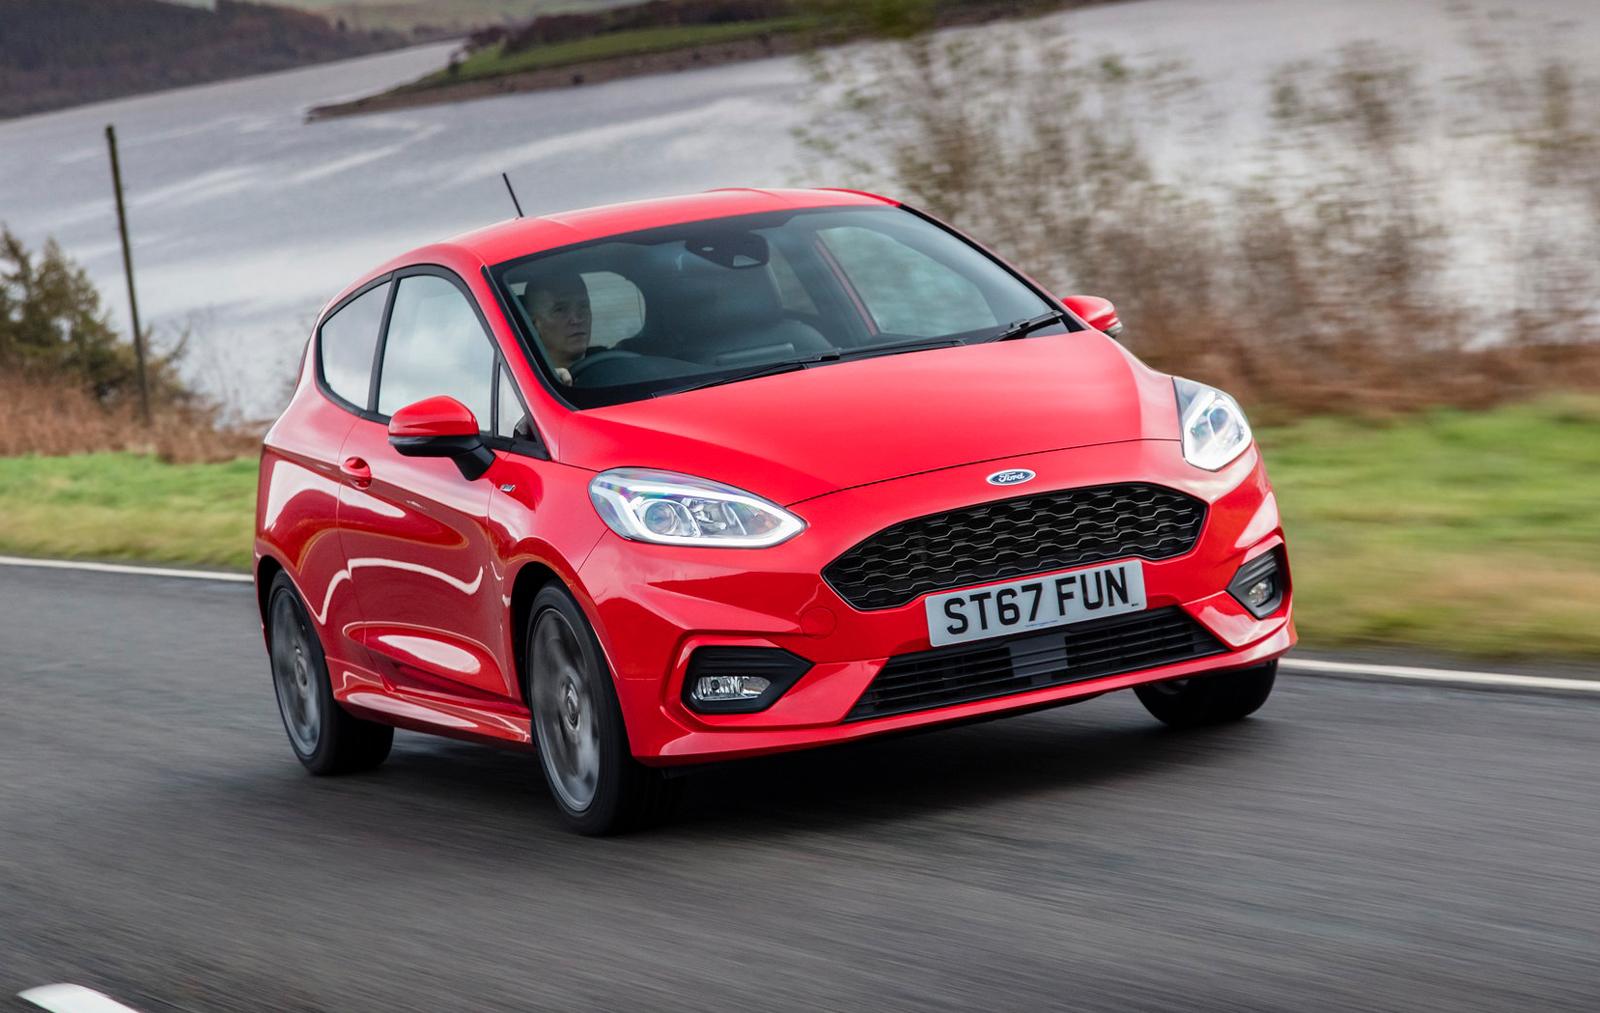 a red Ford Fiesta hatchback driving on a country road alongside a lake